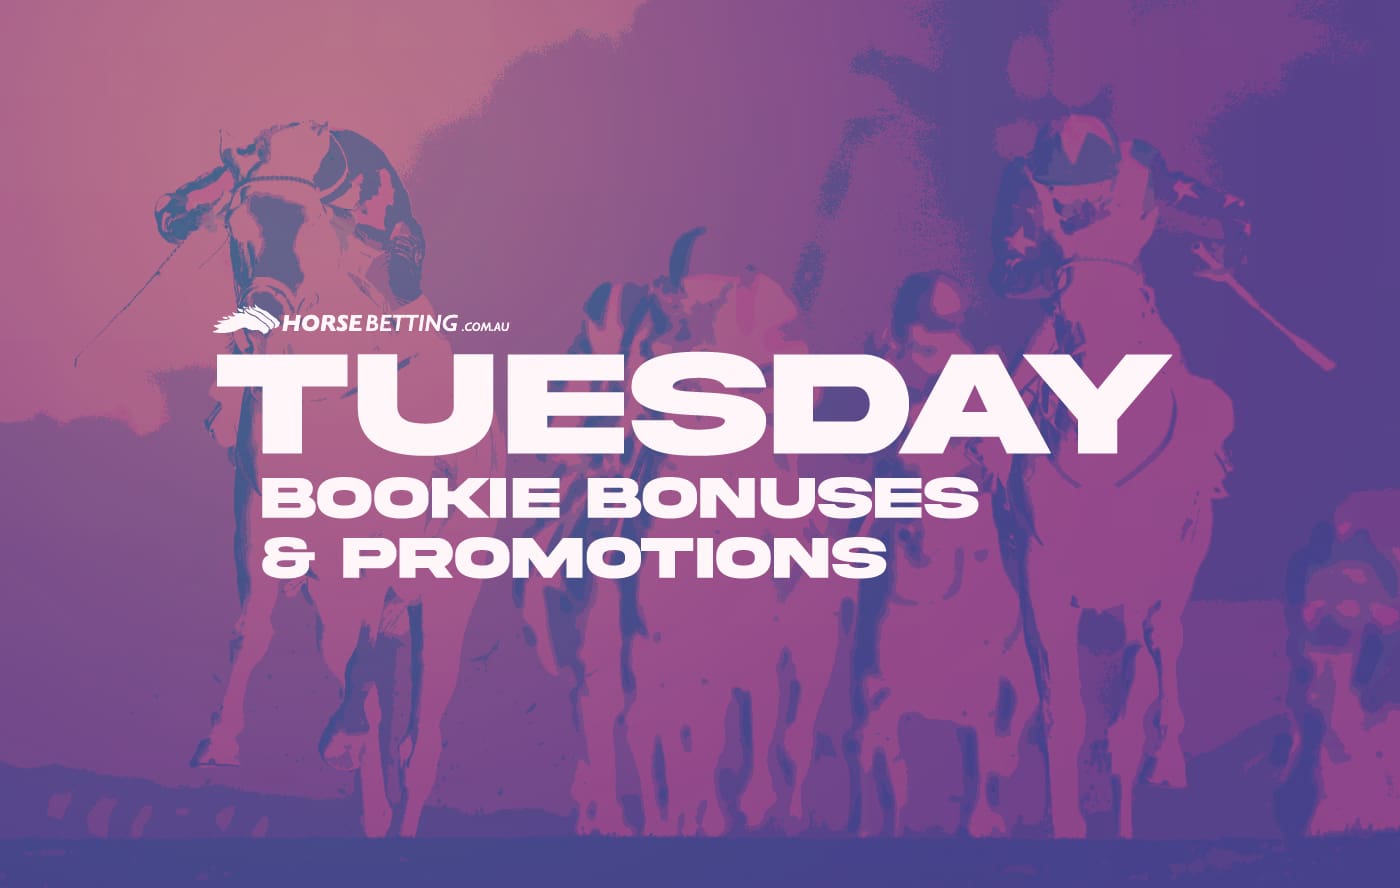 Tuesday horse racing bookie promos for March 26